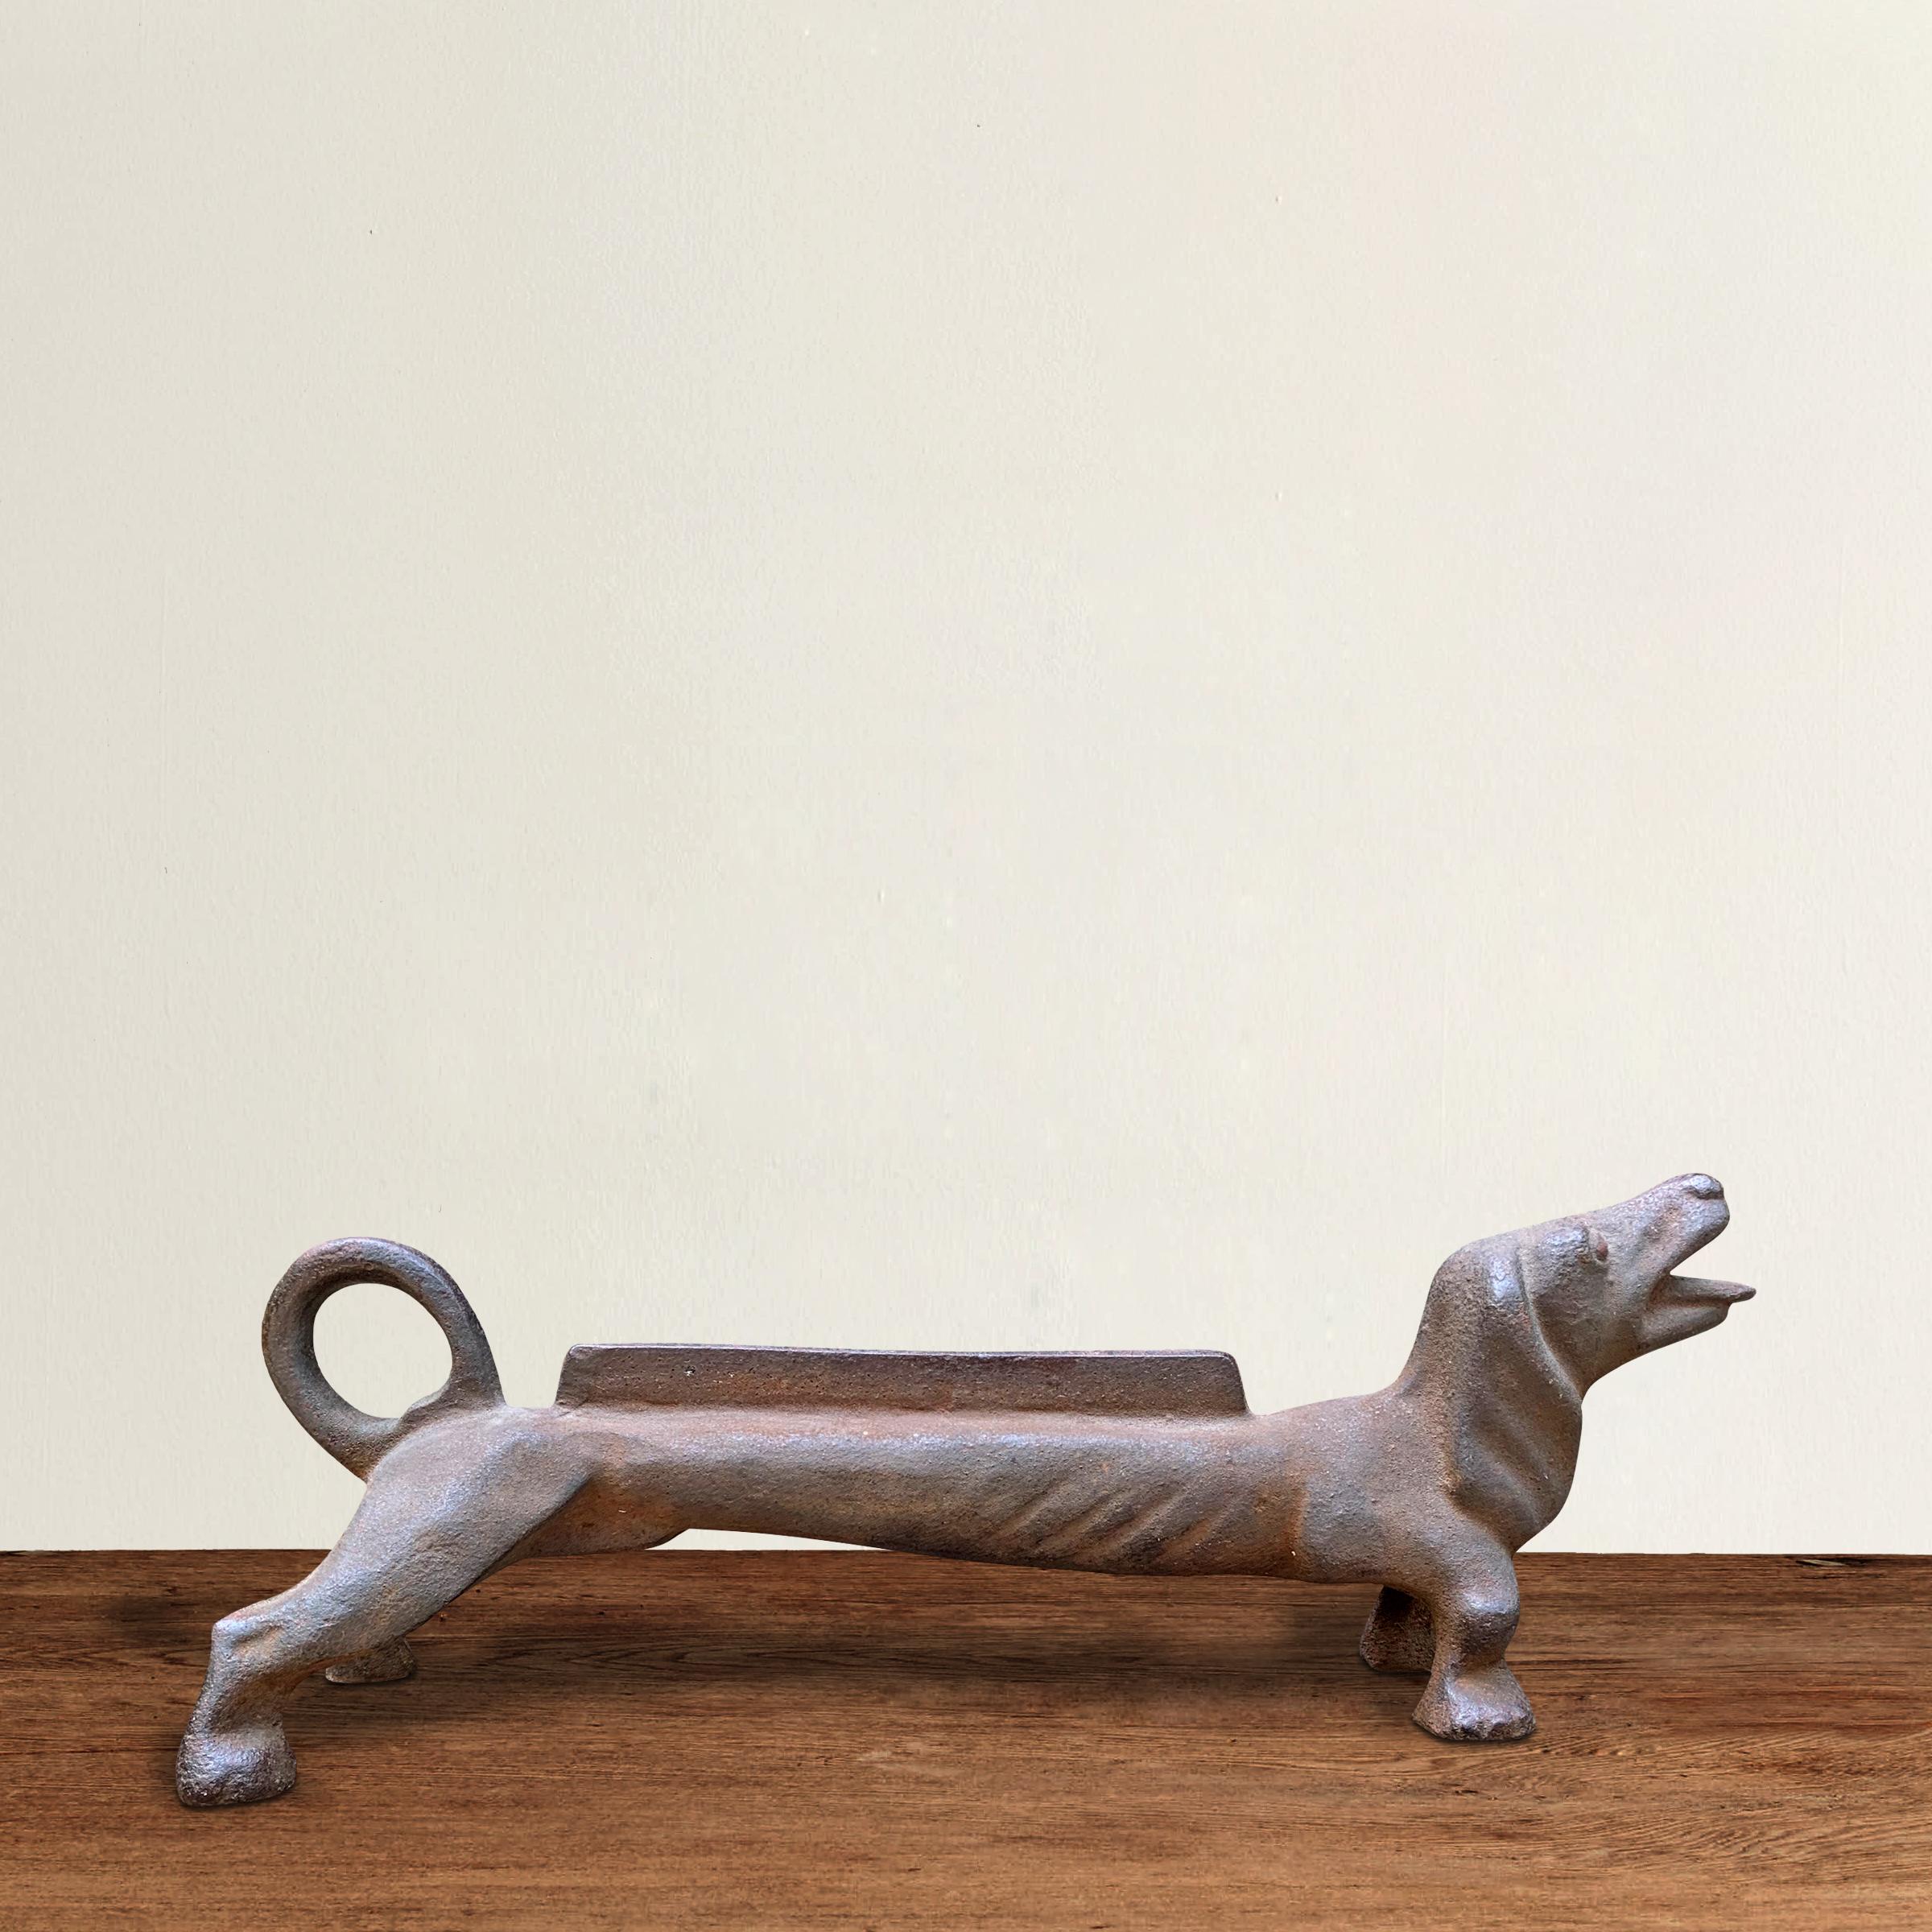 A whimsical late 19th century American cast iron dachshund boot scraper with an open mouth and sweet expression.
 